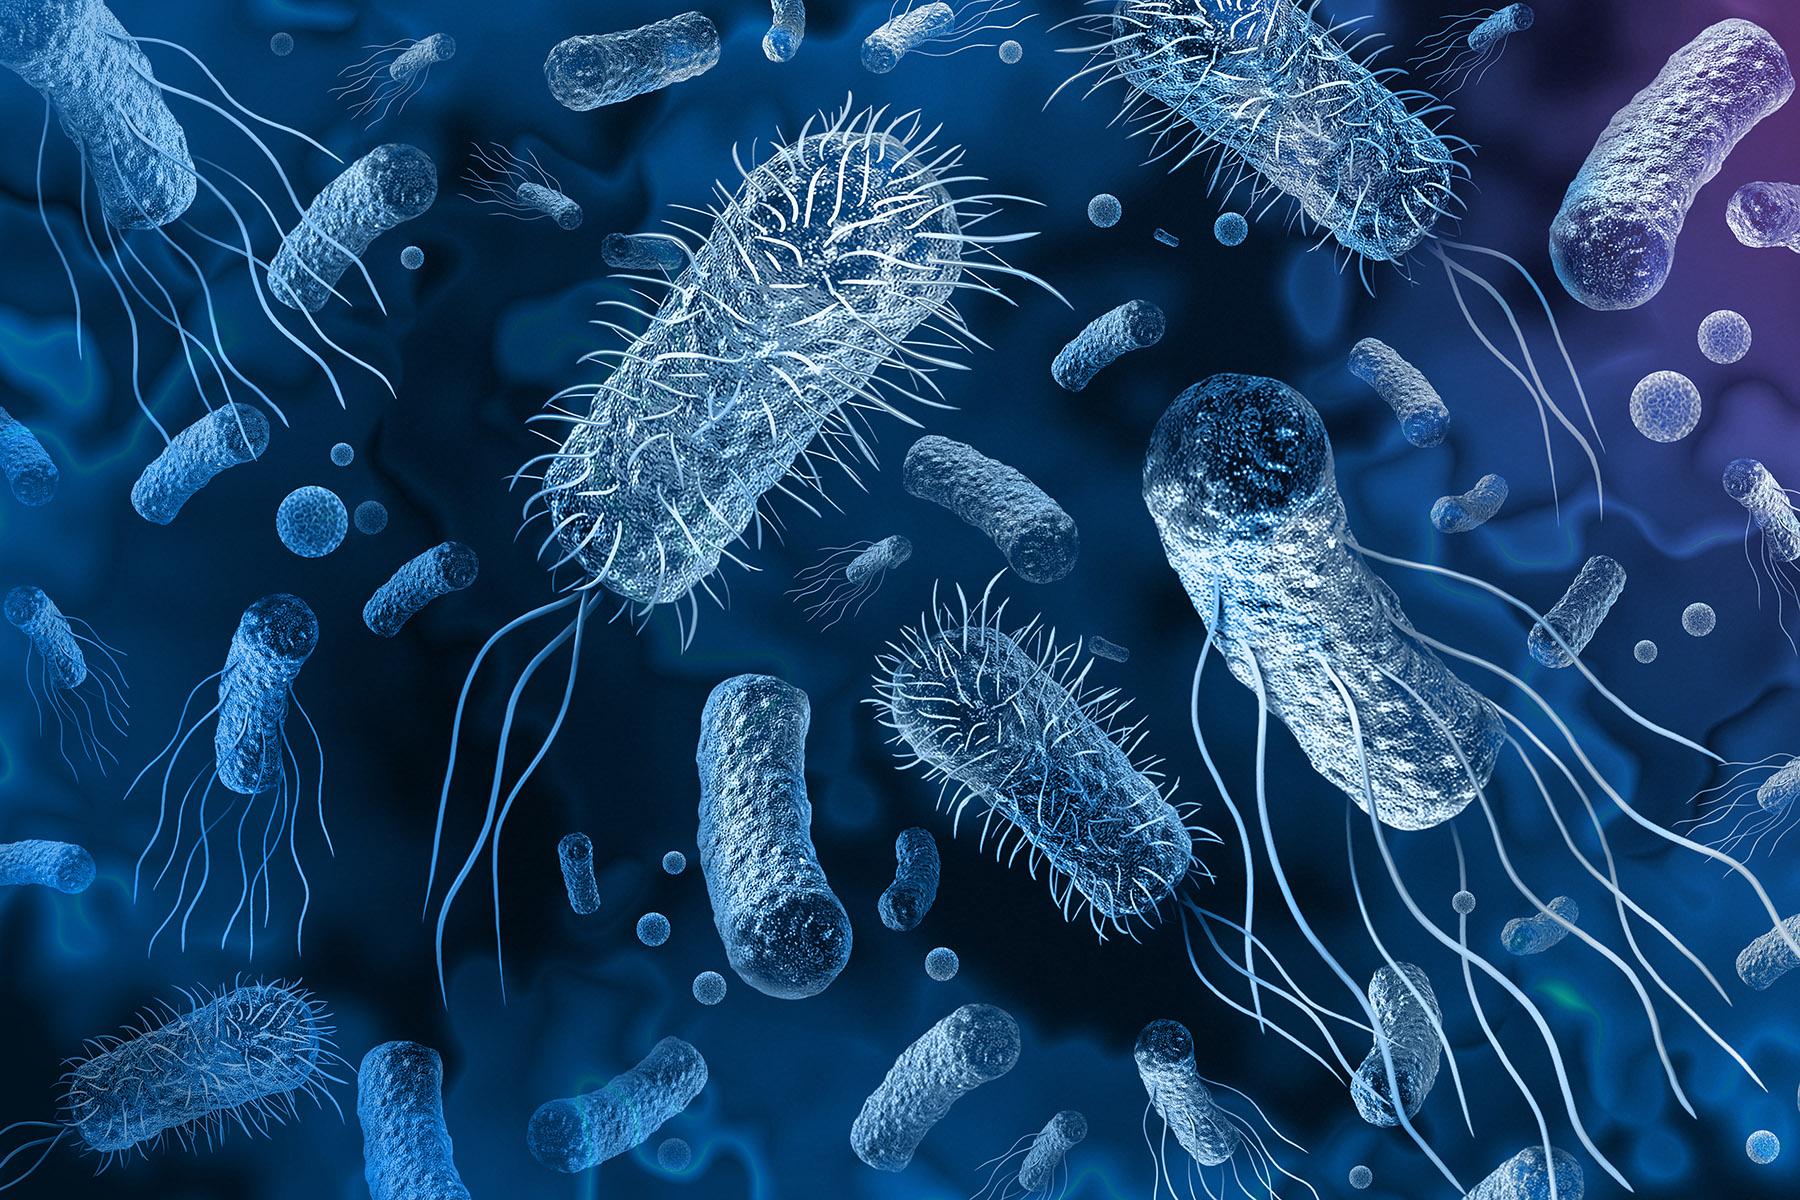 Digital graphic of various bacteria types